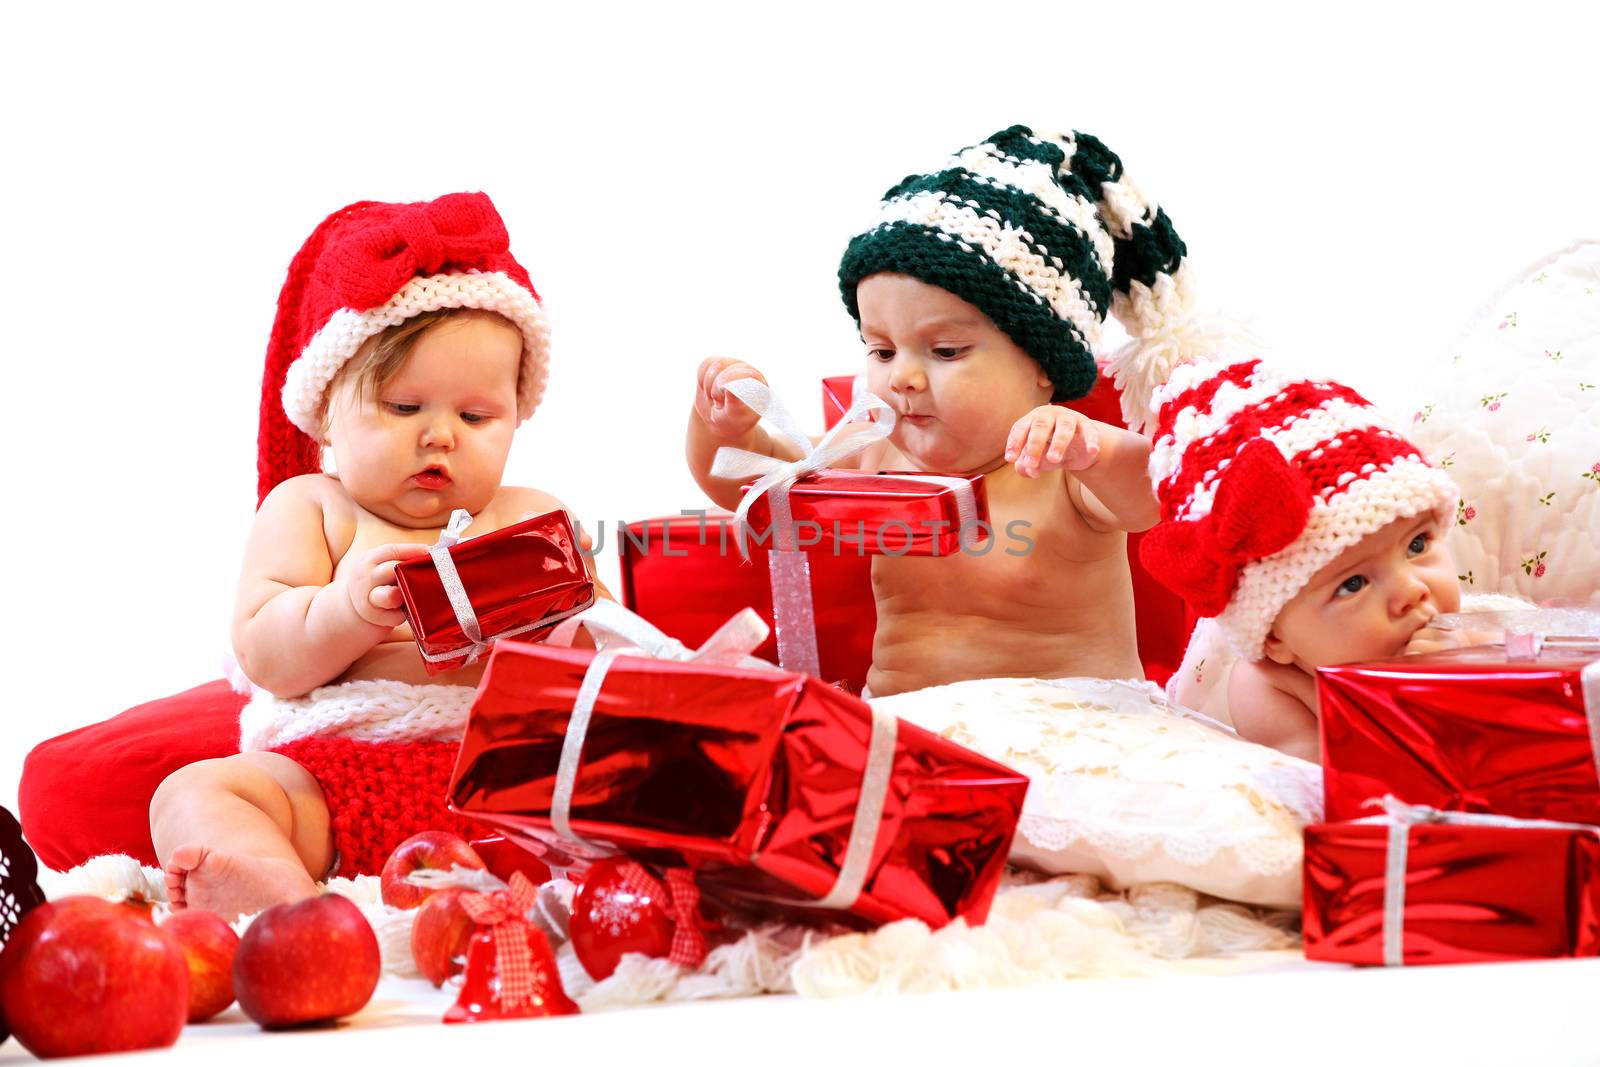 Three babies in xmas costumes playing with gifts over white background